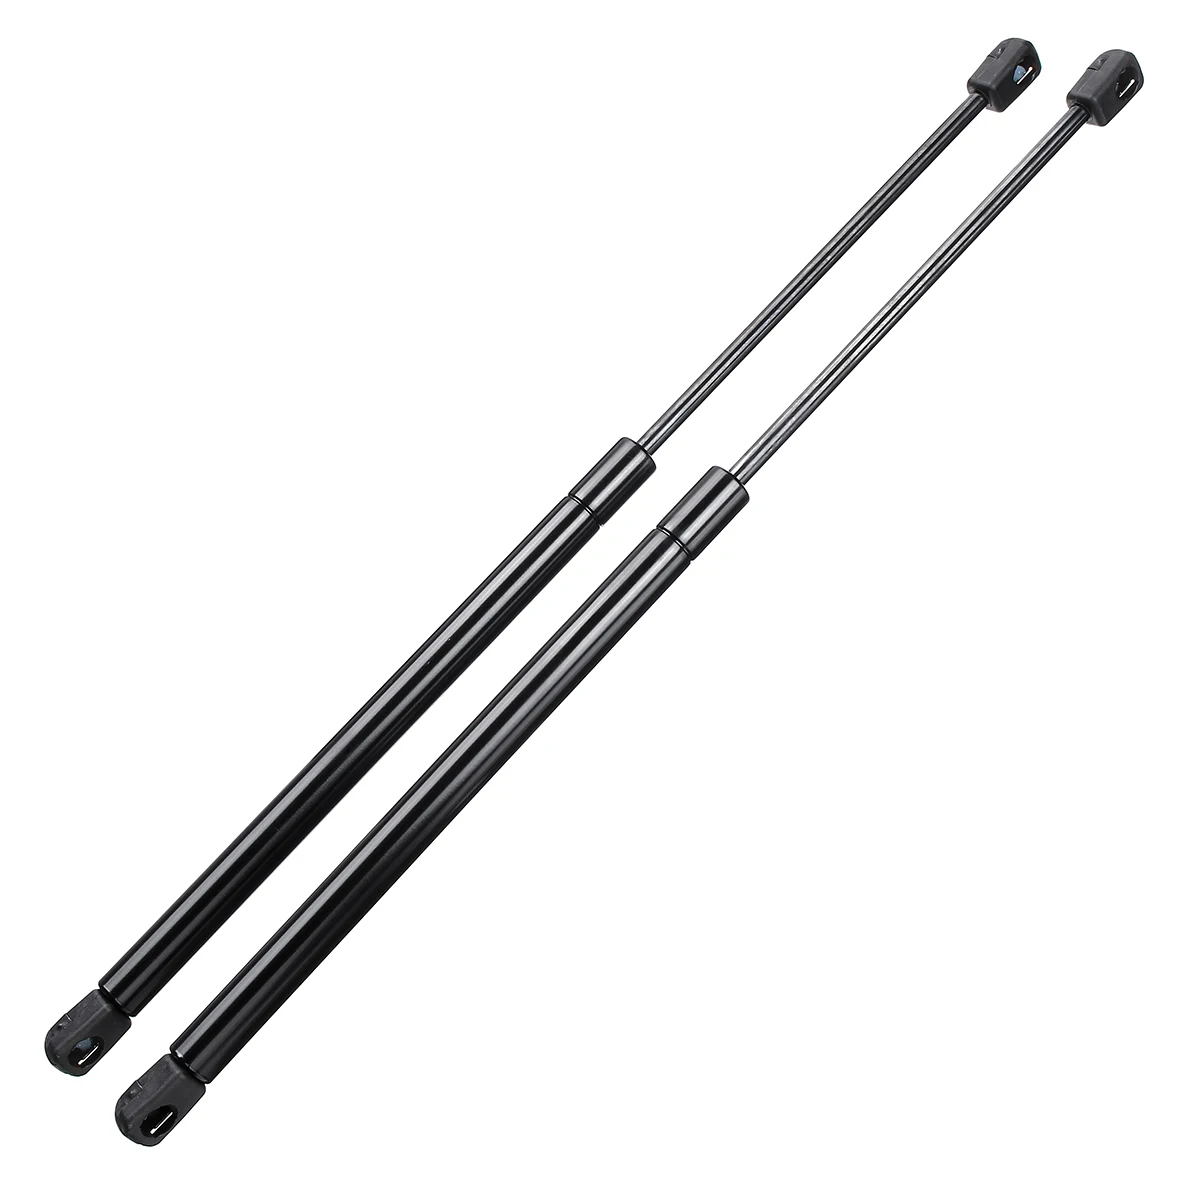 2pcs Car Front Engine Hood Lift Supports Props Rod Arm Gas Springs Shocks Strut Bars For Jeep Liberty 2002-2007 SG314037